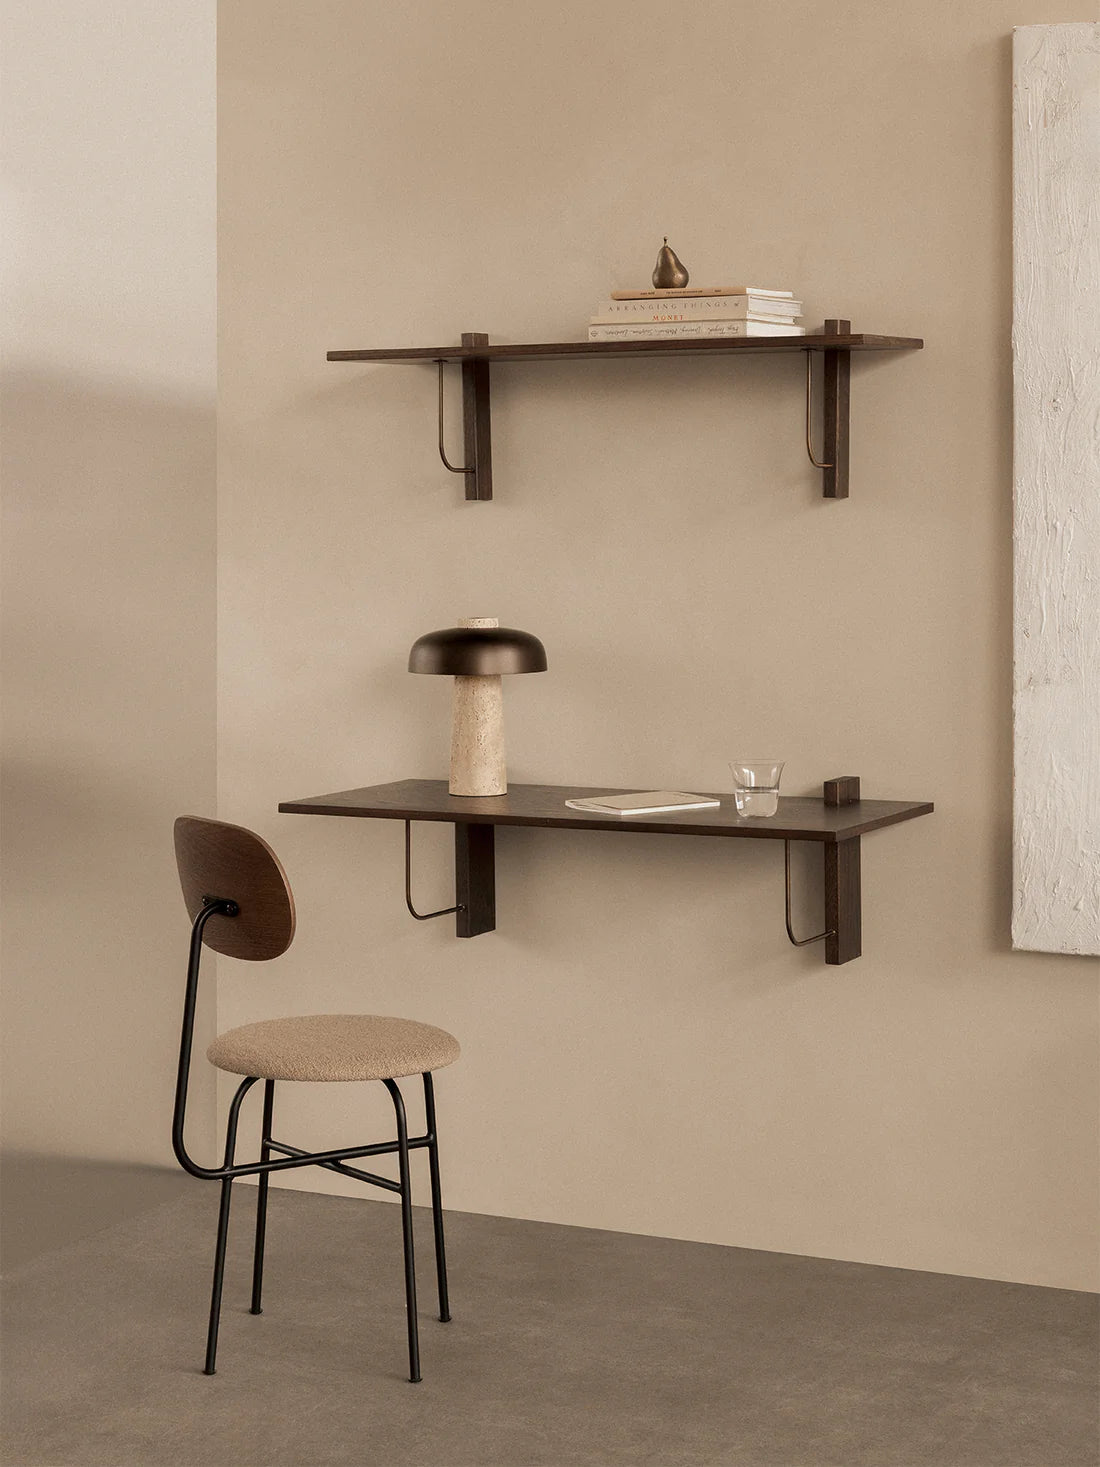 The Reverse Table Lamp on the Corbel Desk with on top the Corbel Shelf from Audo Copenhagen